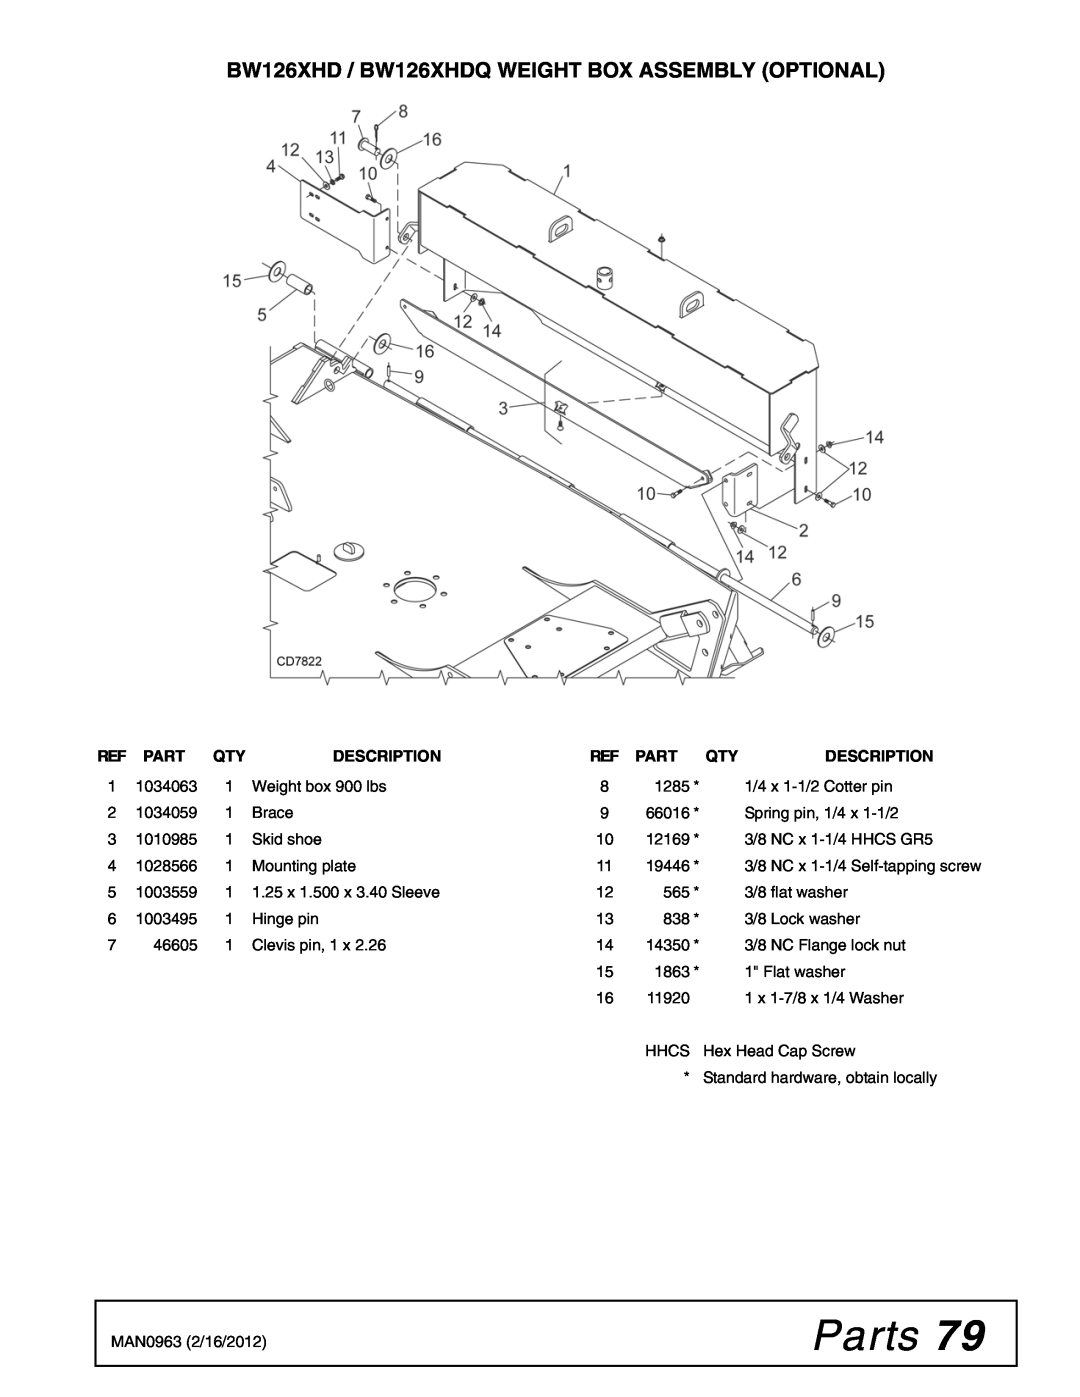 Woods Equipment BW180XHDQ manual Parts, BW126XHD / BW126XHDQ WEIGHT BOX ASSEMBLY OPTIONAL, Description 